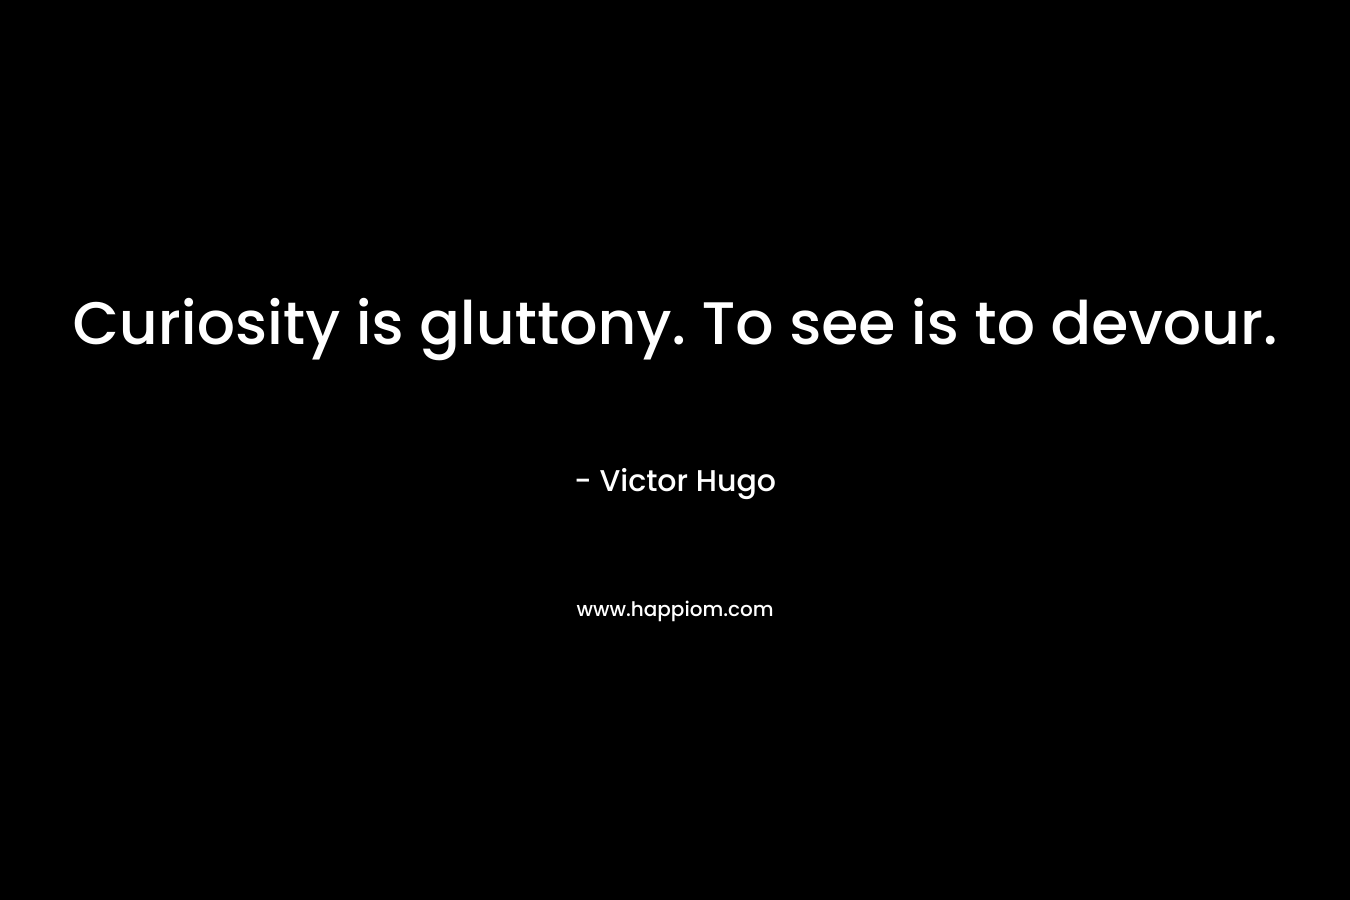 Curiosity is gluttony. To see is to devour. – Victor Hugo